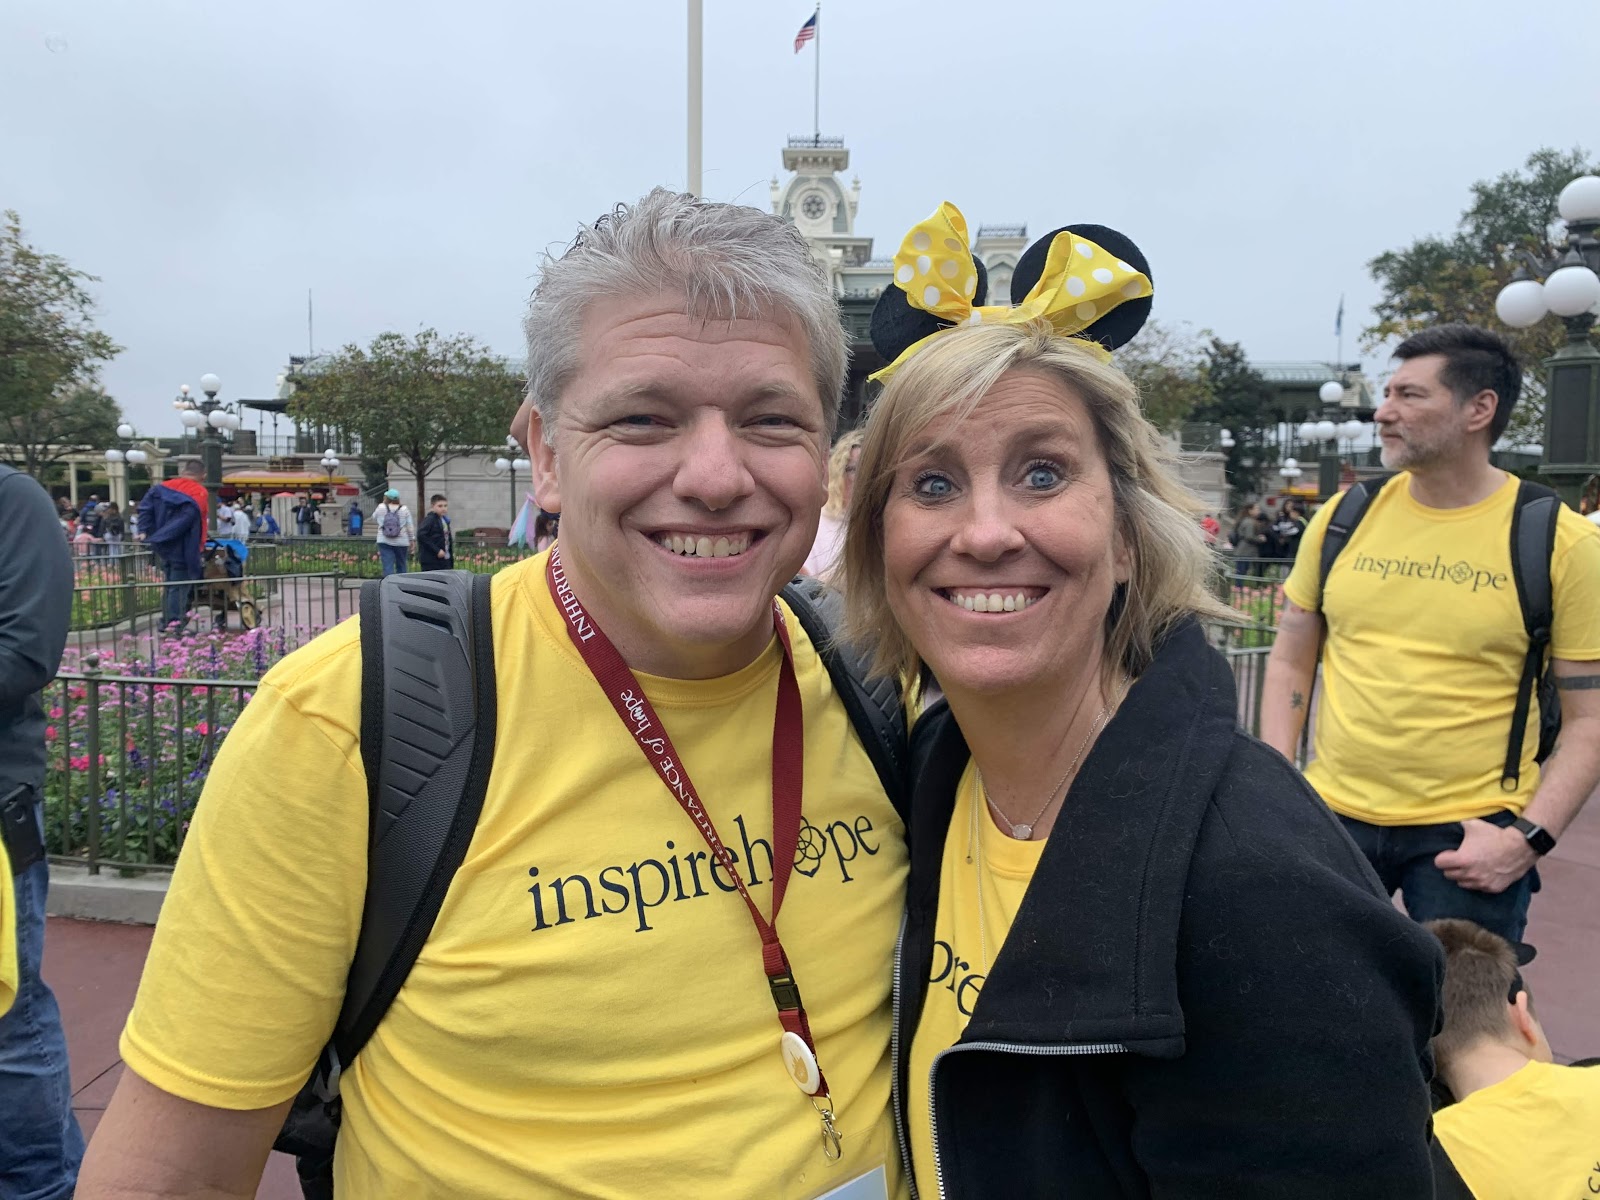 Troy Higley, who attended the first Kendra Scott-sponsored retreat with his family, returned with his wife Tracy, who is now not only a former family member served, but also a three-time volunteer!